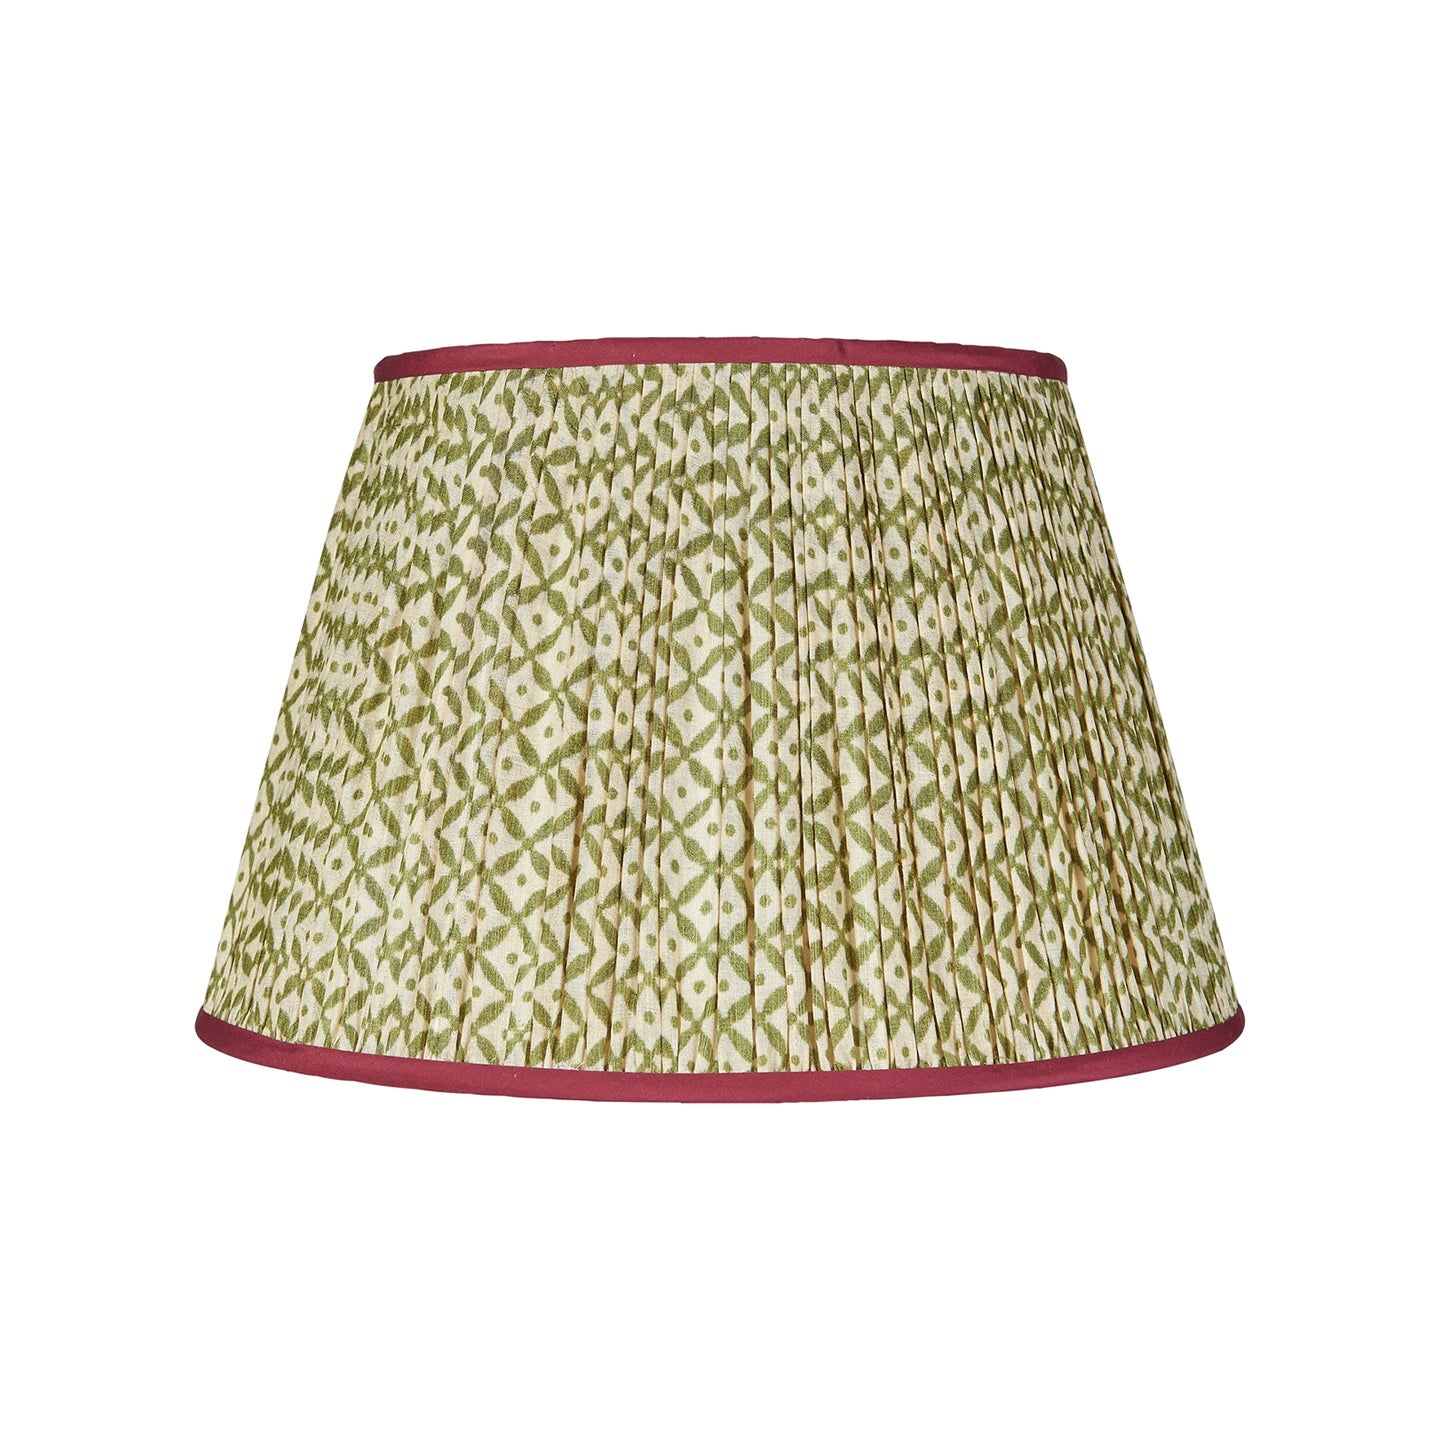 Green Trellis Pleated Silk Lampshade with Red Trim